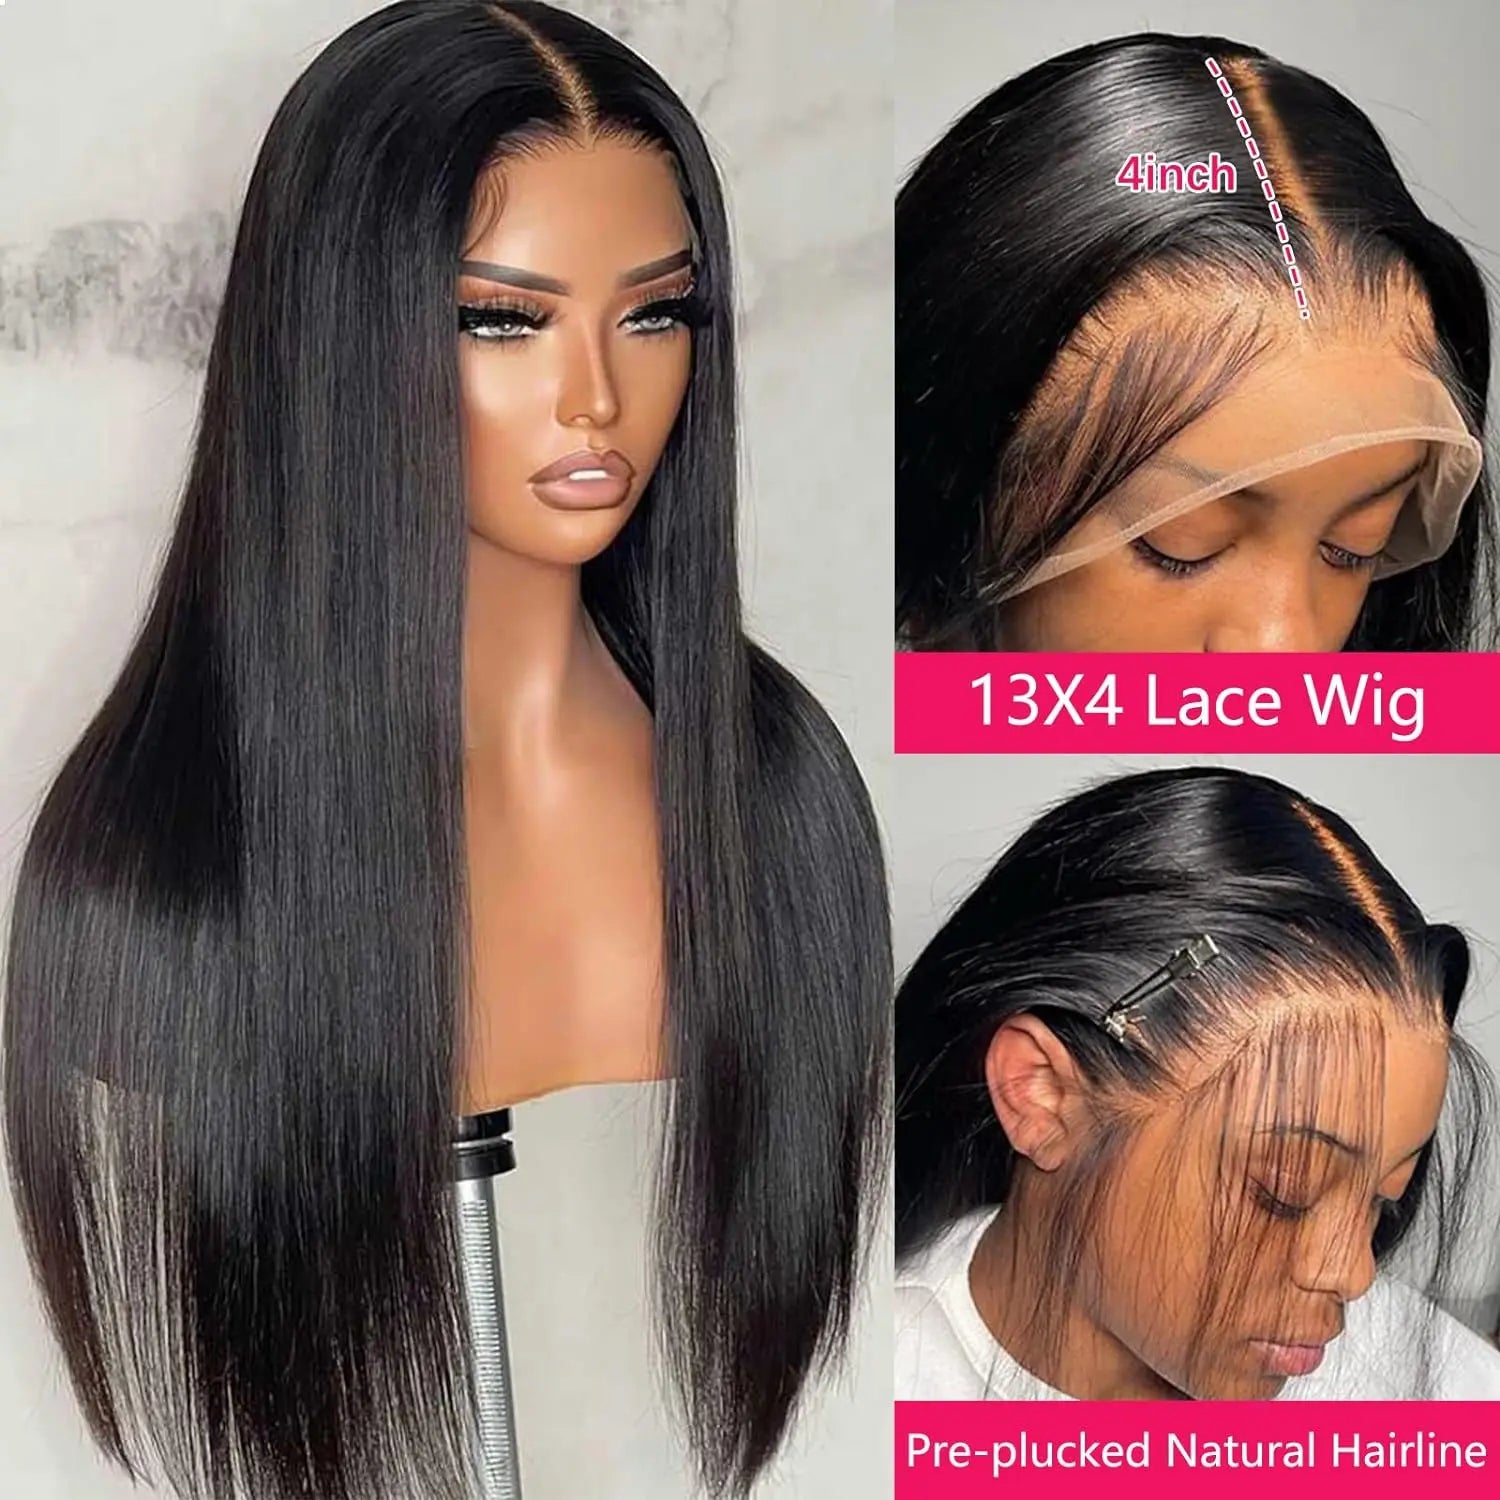 Brazilian Lace Front Human Hair Wig: Premium Quality